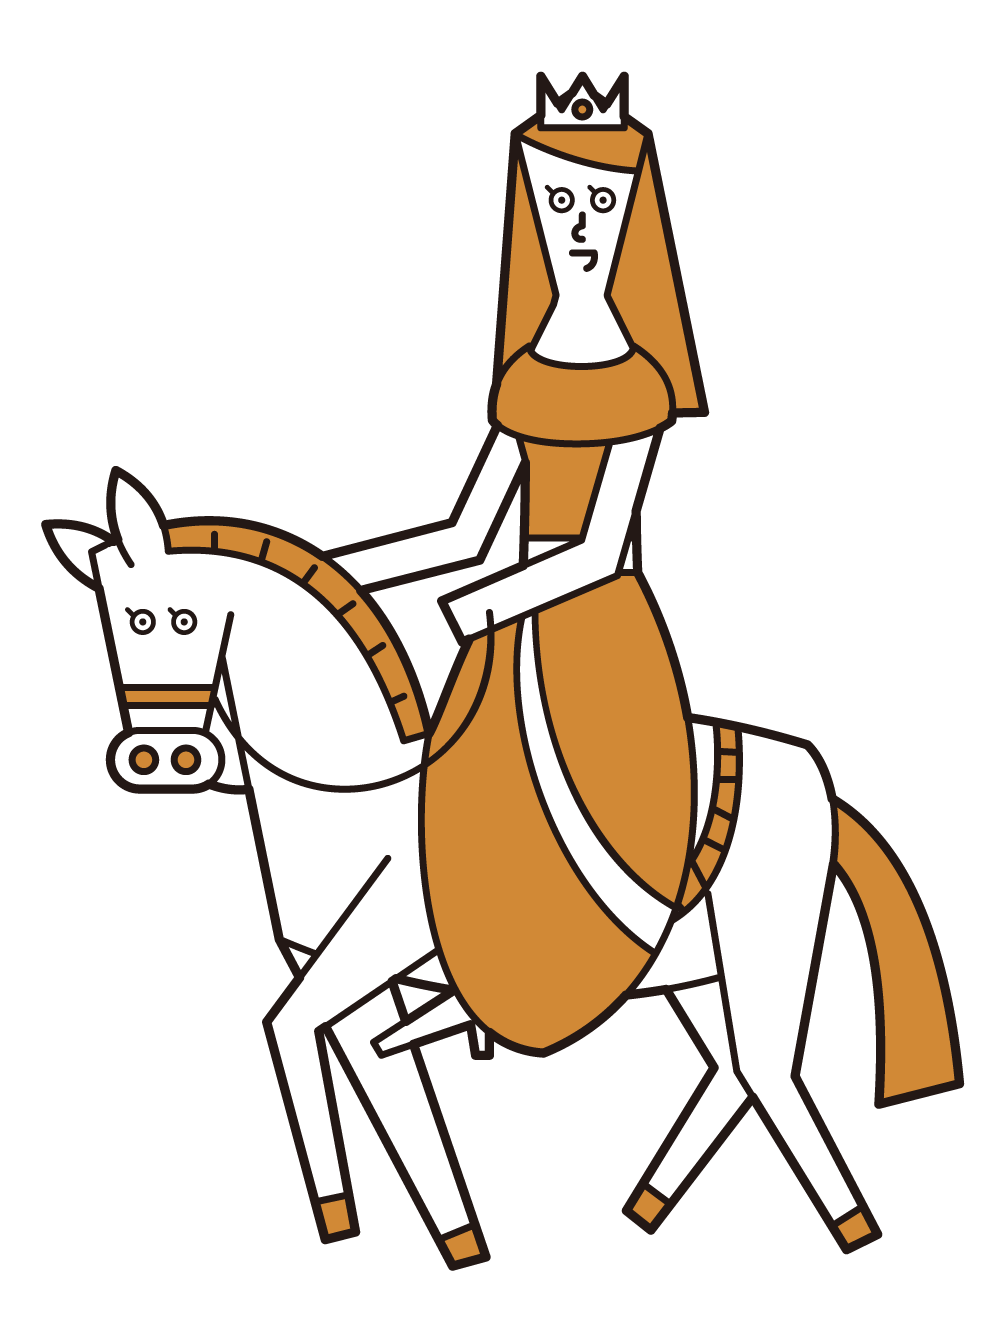 Illustration of a princess (woman) on a white horse